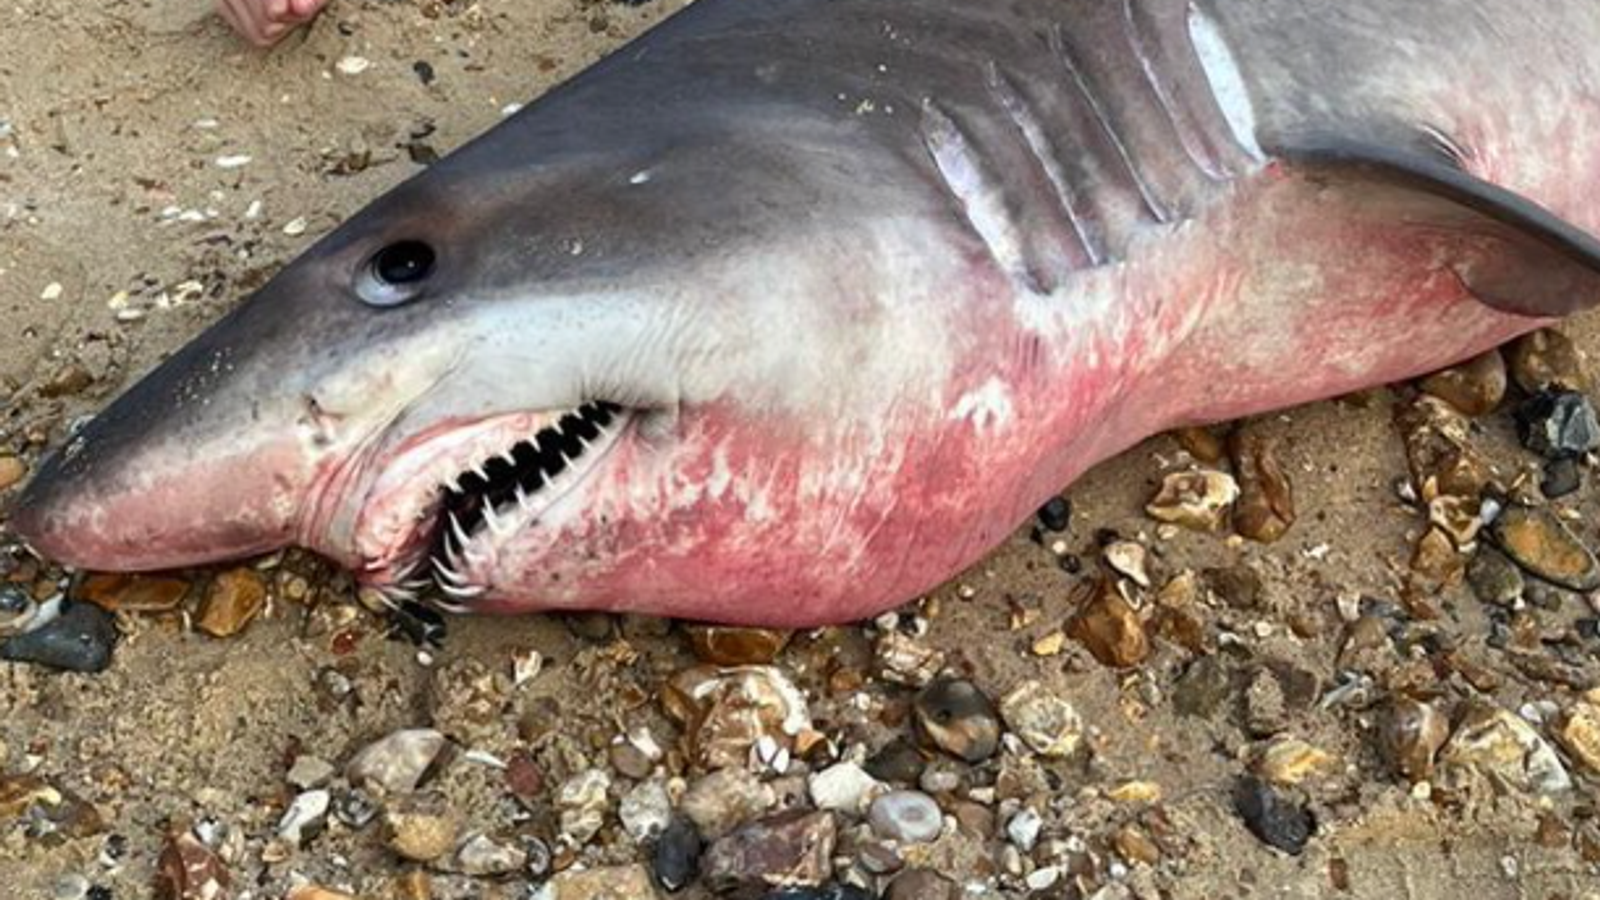 Dan Snow joins hunt for rare head of 'butchered' shark washed up in Hampshire which could 'unlock' scientific discoveries